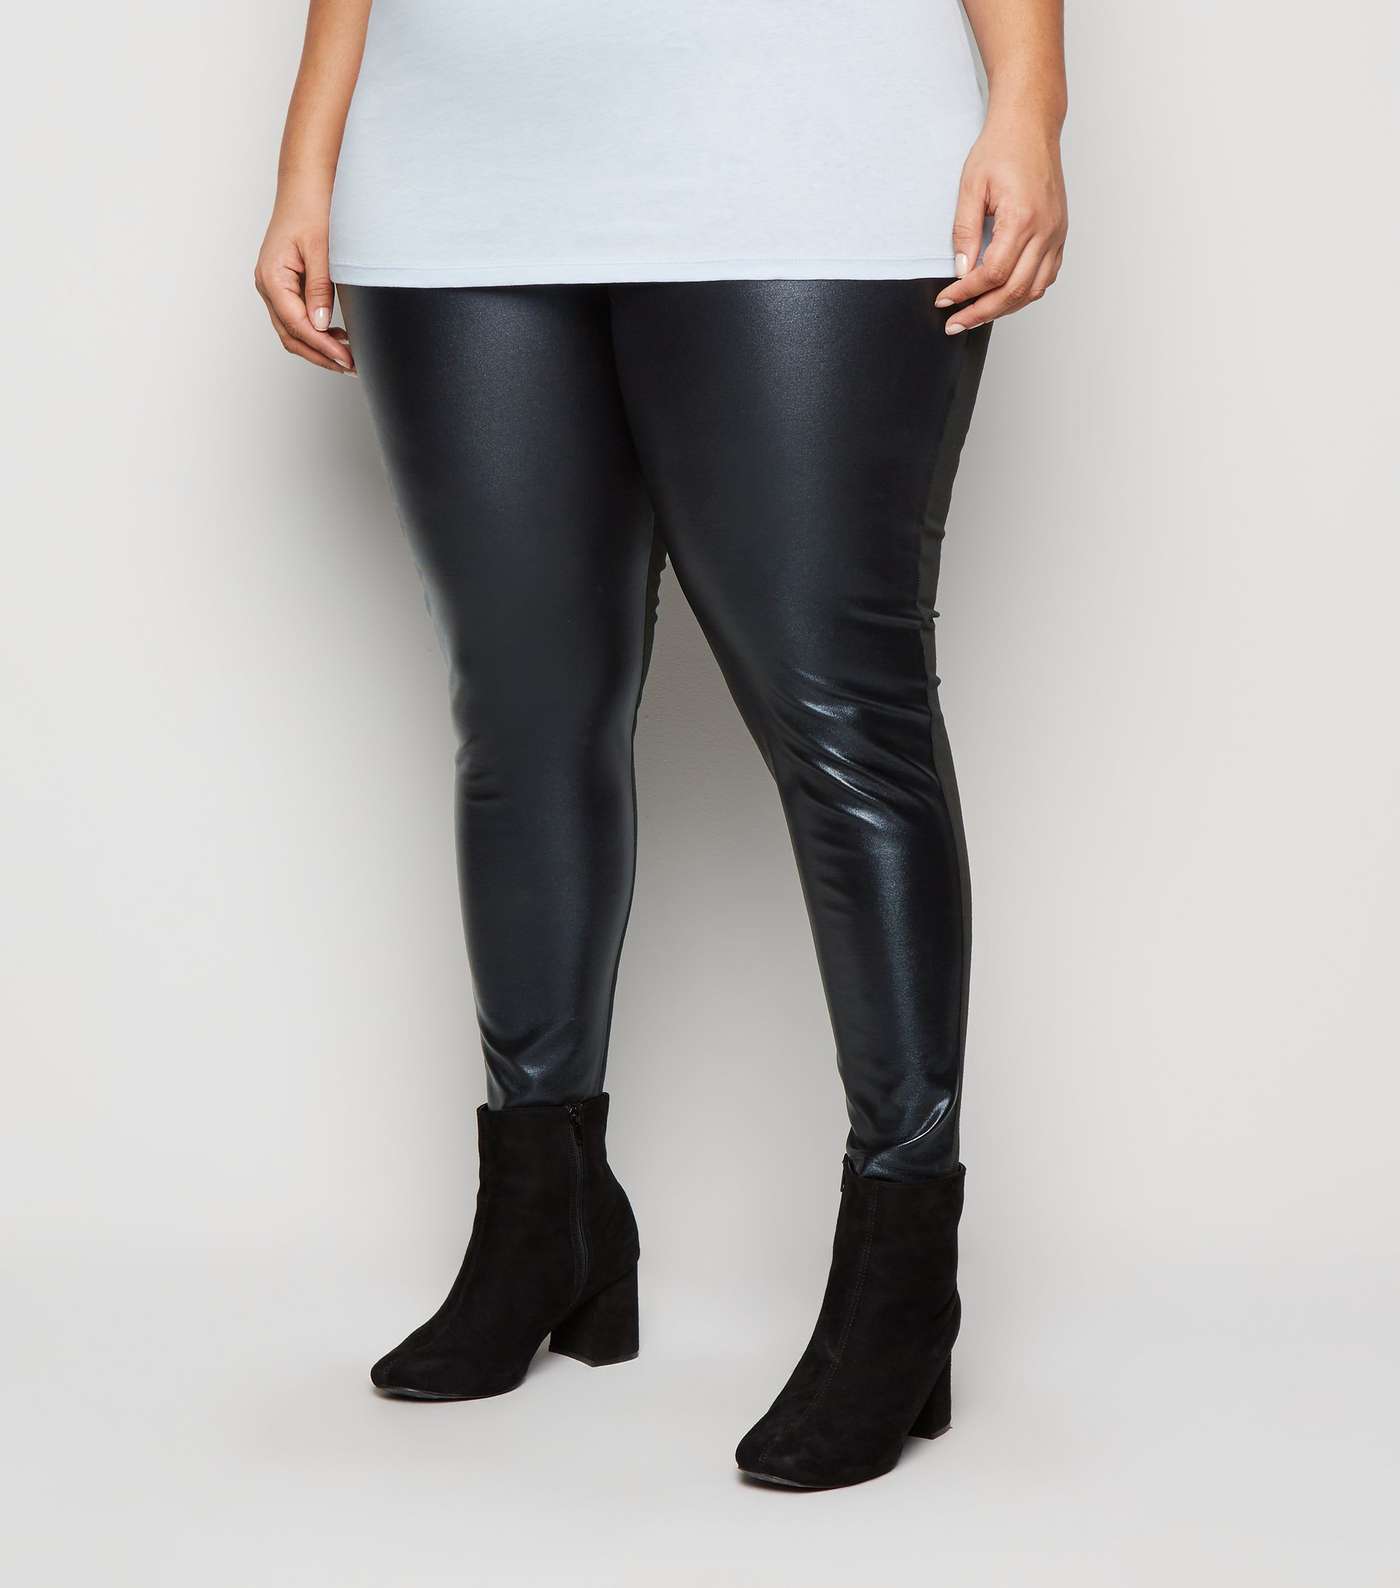 Curves Black Leather-Look Front Leggings Image 2